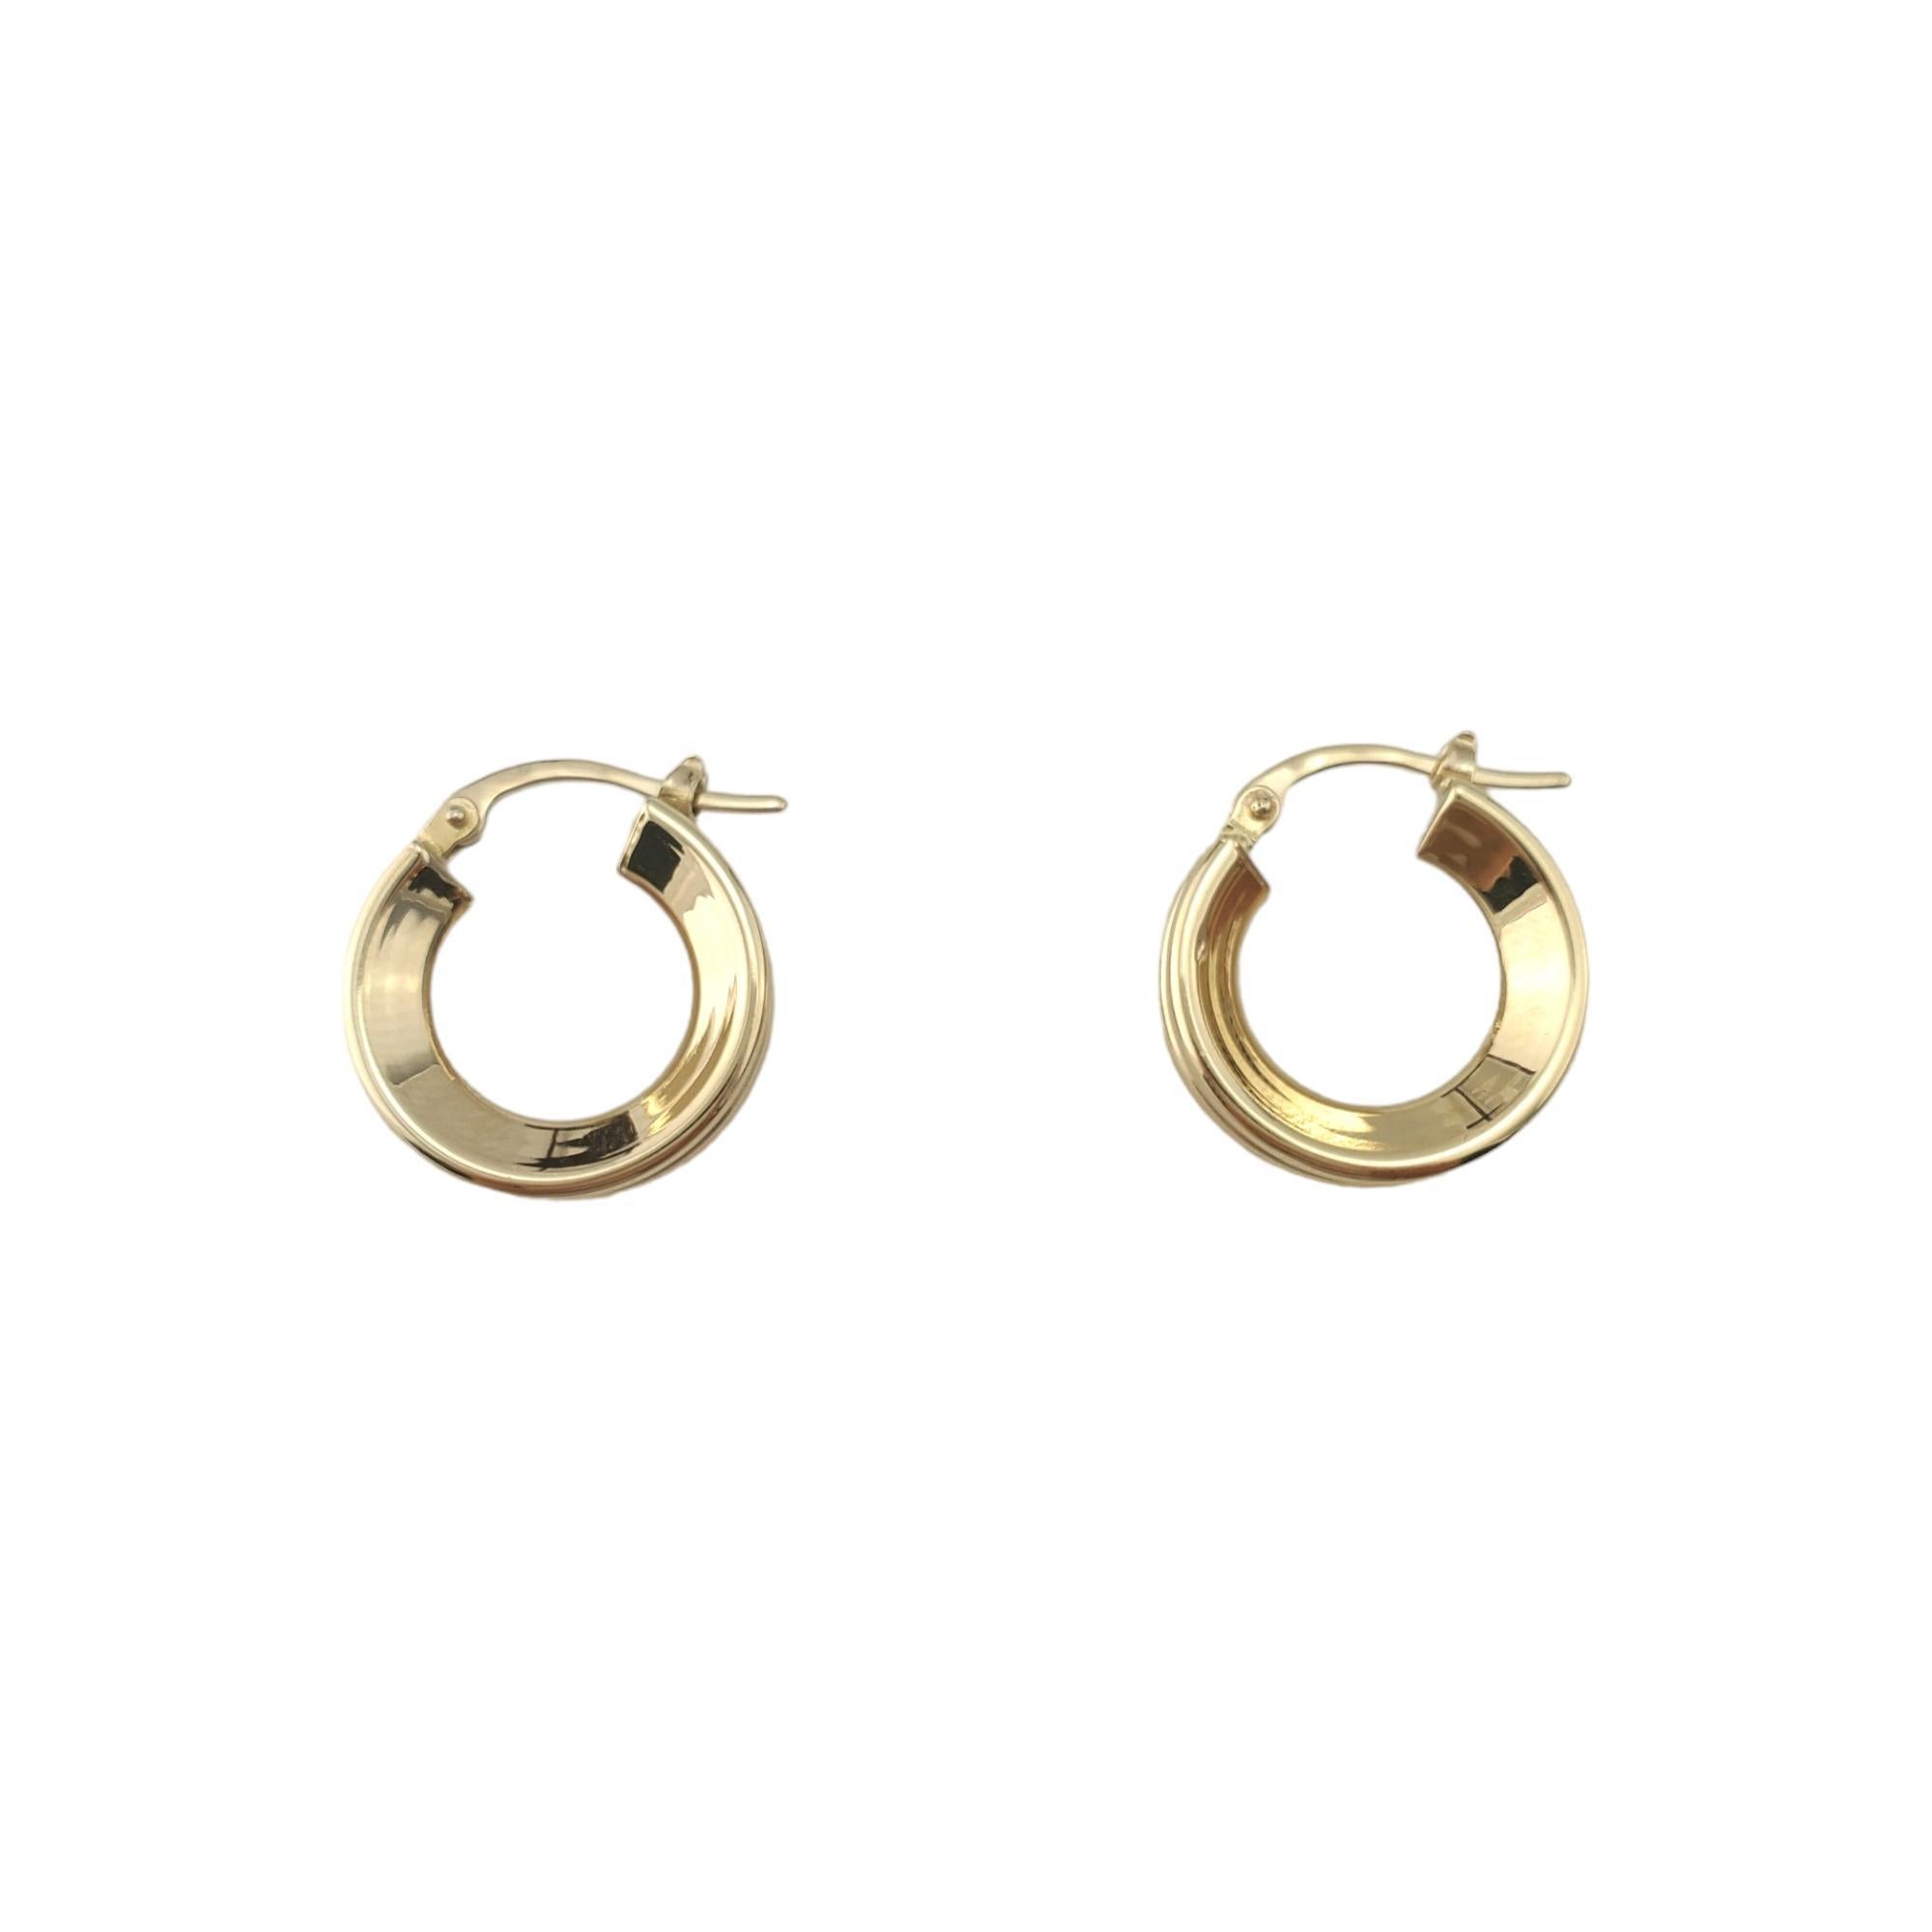 14K Yellow Gold Concave Ribbed Hoop Earrings

Small hoop earrings with intricate ribbed design in 14K yellow gold.

Hallmark: 14K Italy

Weight: 1.7 g/ 1.1 dwt.

Size: 18.5 mm X 4.5 m X 3.7 mm

Very good condition, professionally polished.

Will